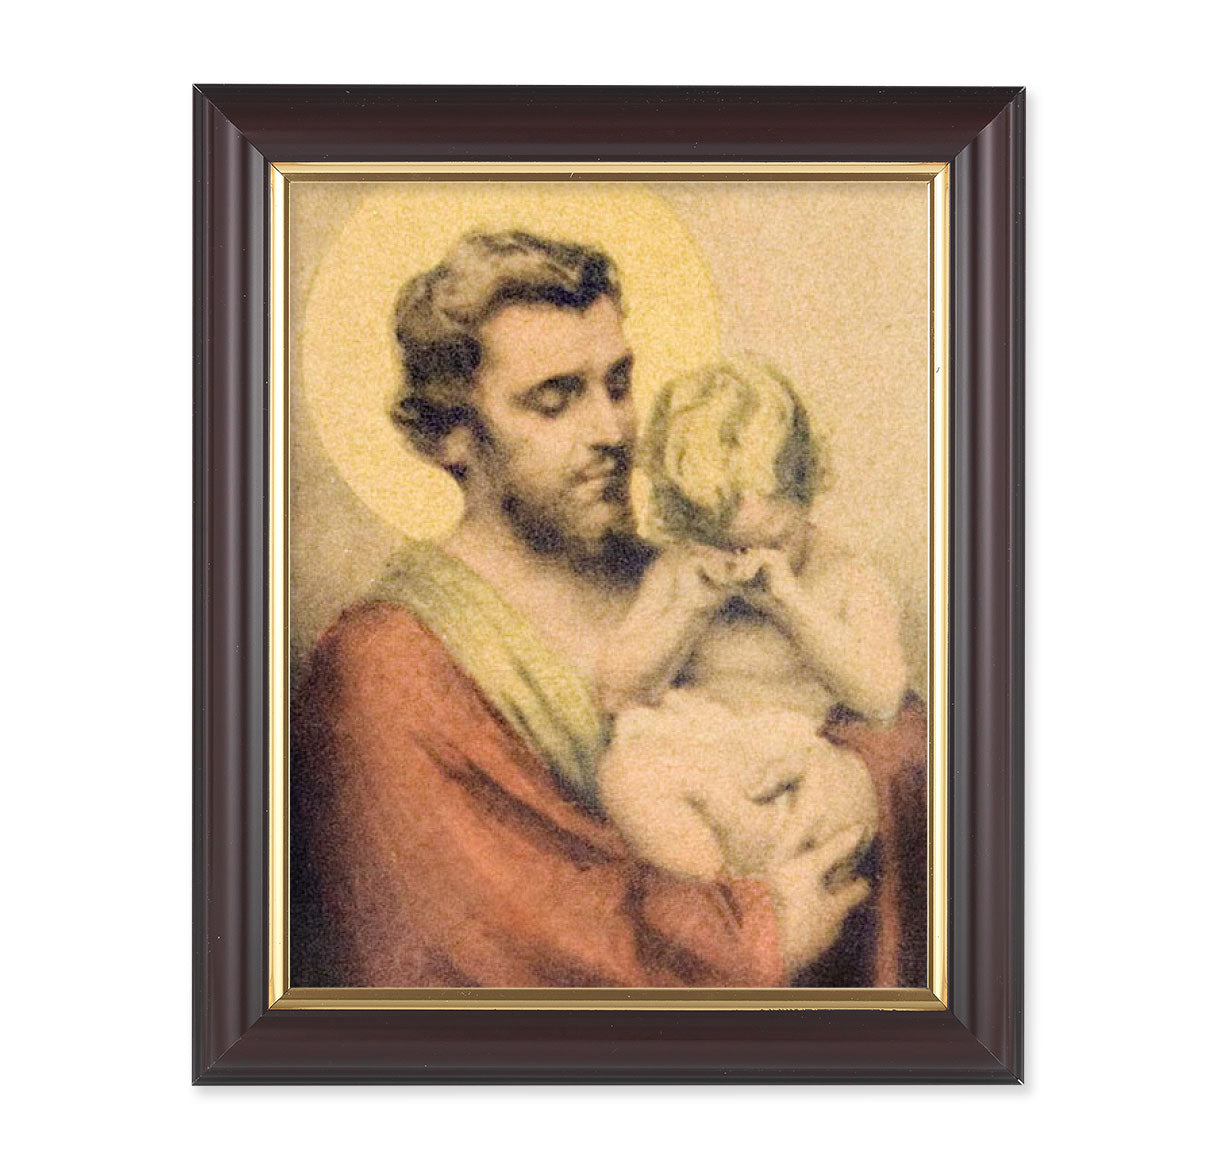 St. Joseph with Crying Jesus Picture Framed Wall Art Decor Medium, Classic Fluted Dark Walnut Finished Frame with Gold-Leaf Lip